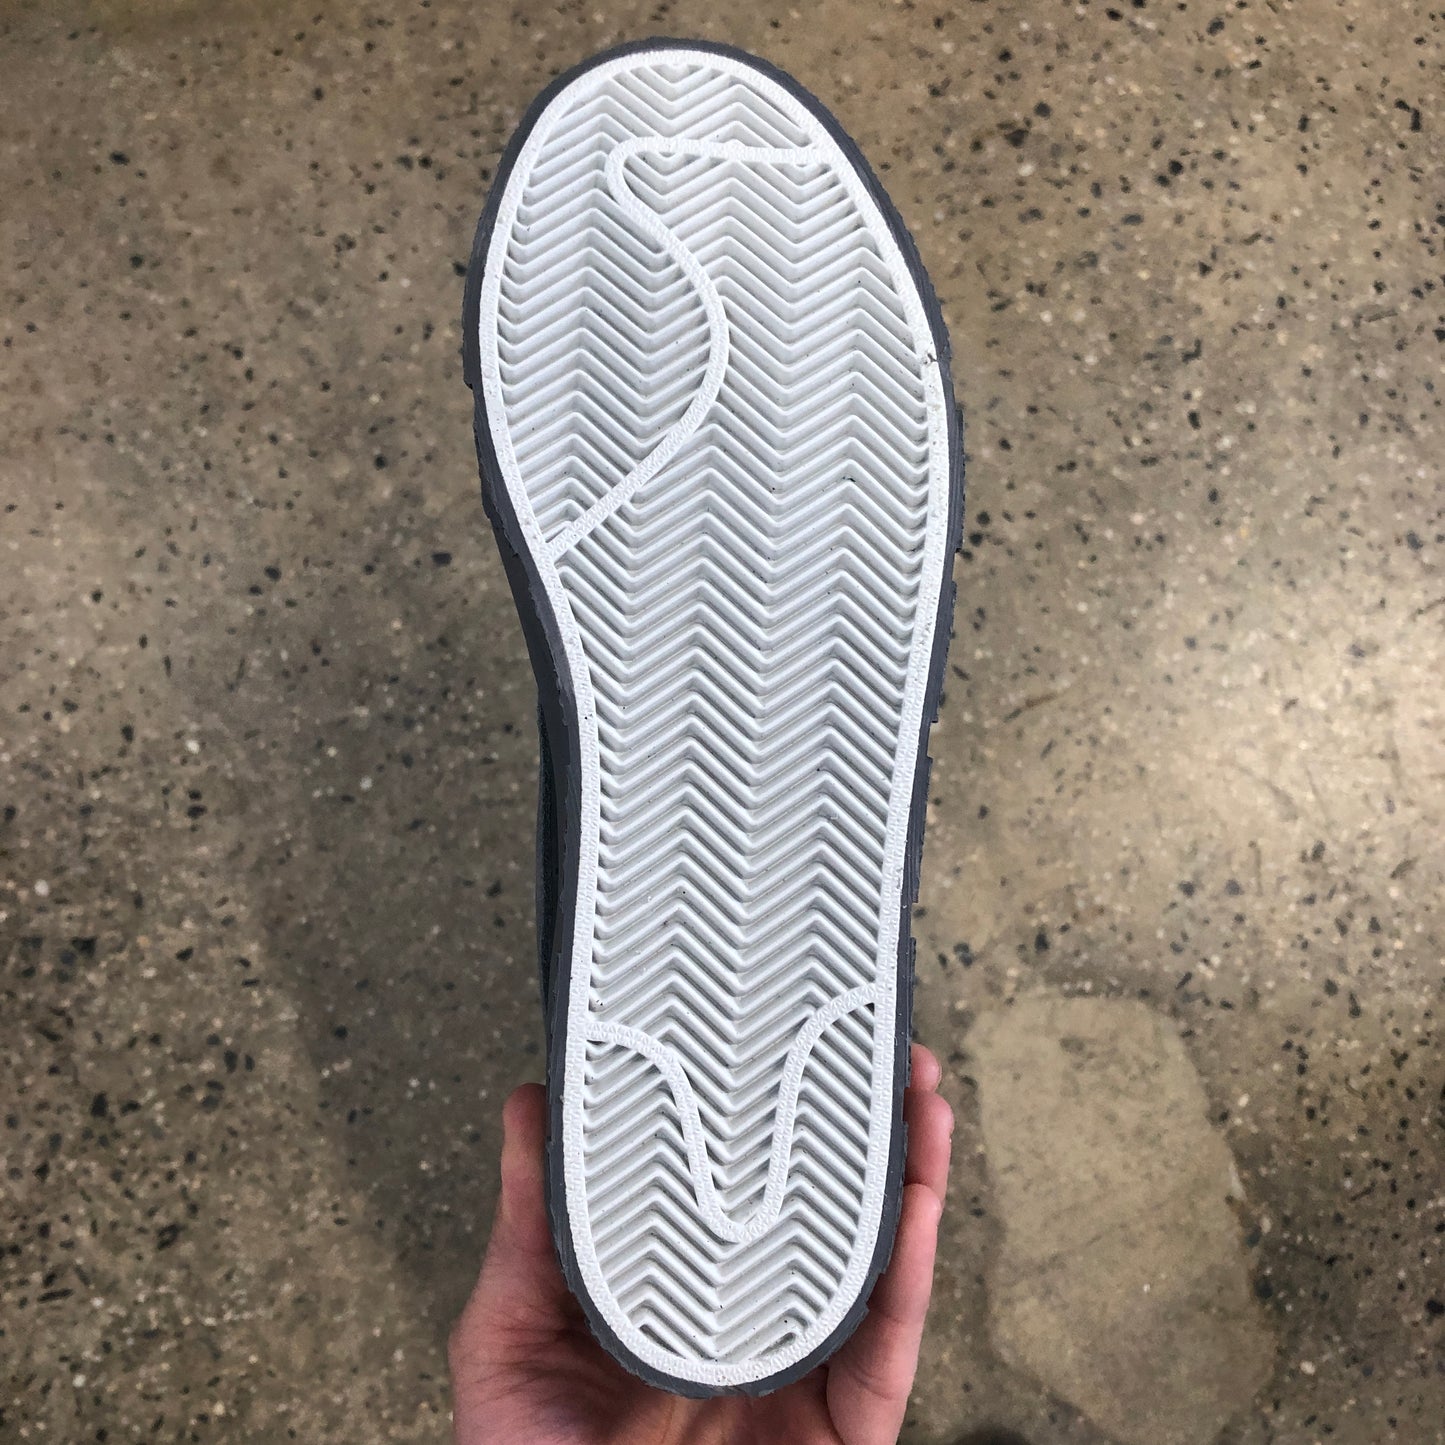 photo of the white sole of the shoe